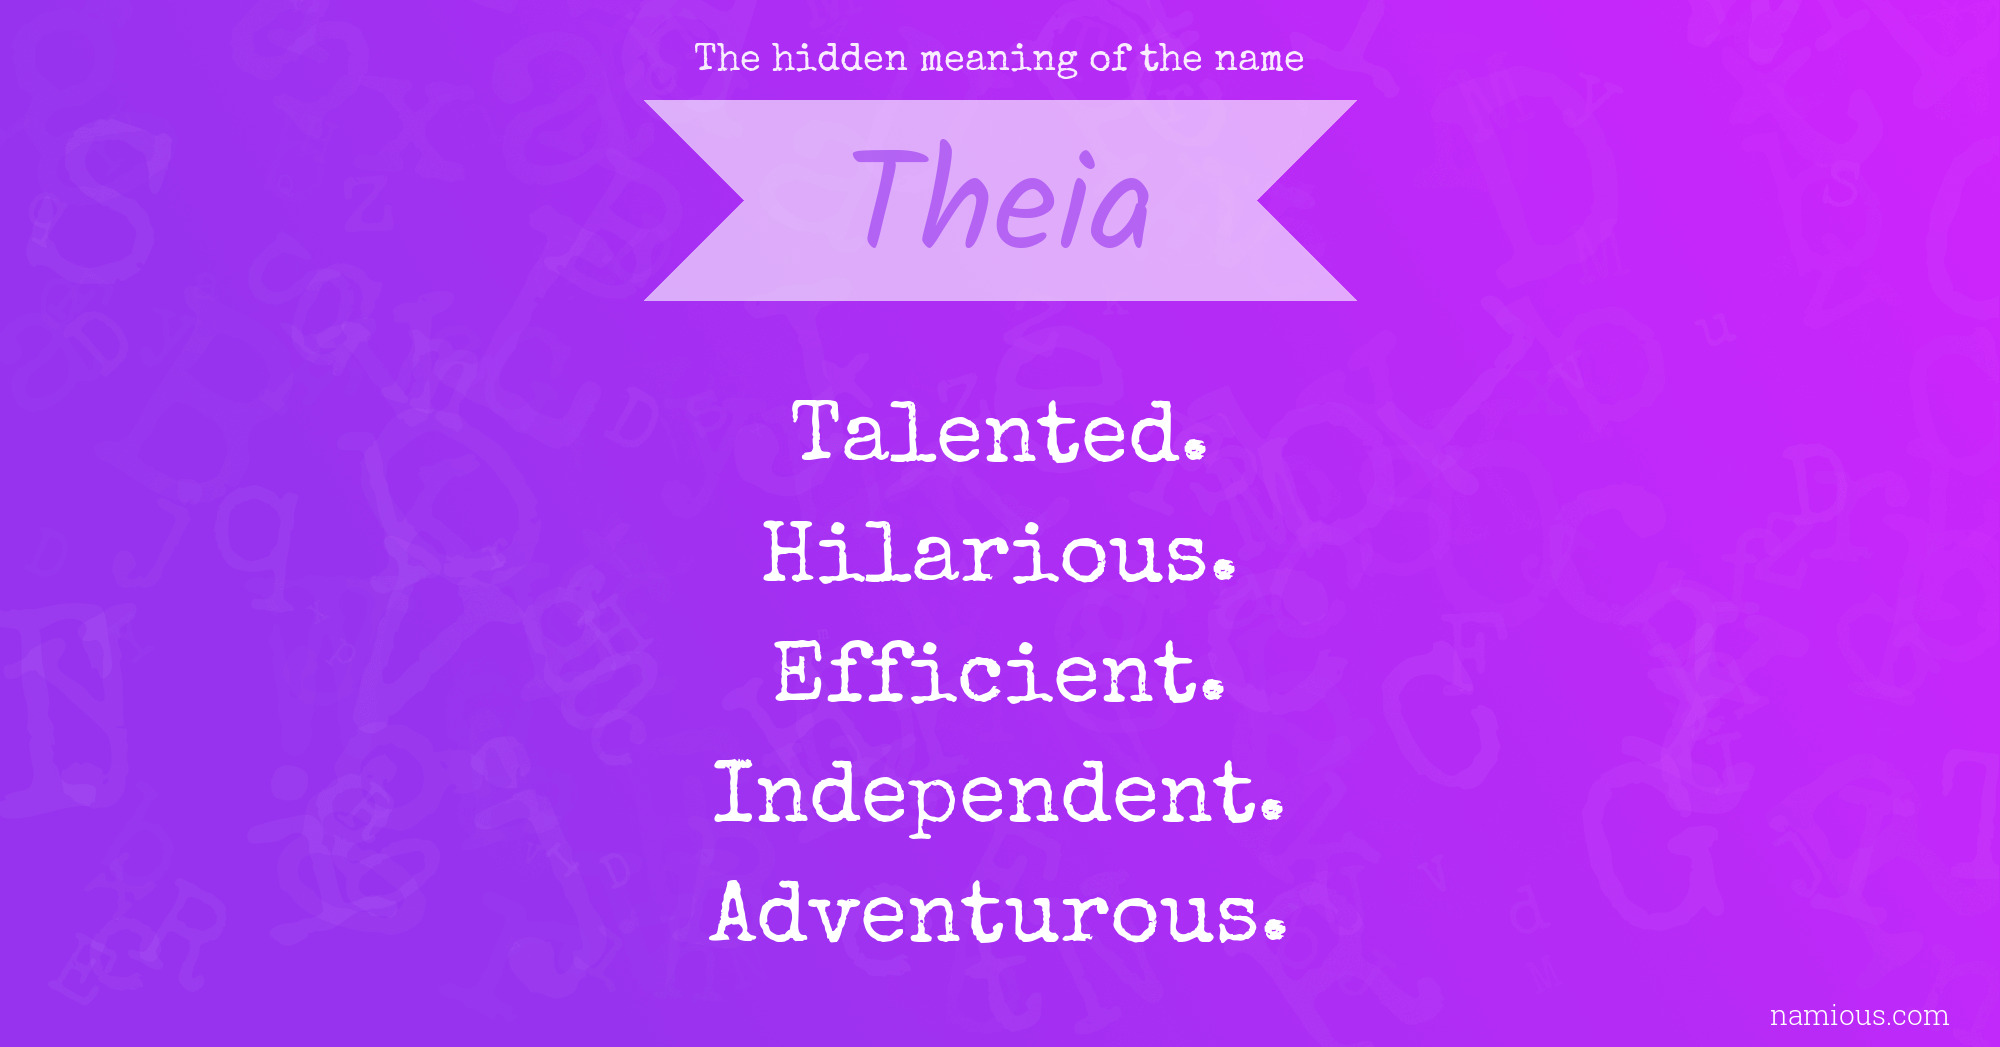 The hidden meaning of the name Theia | Namious